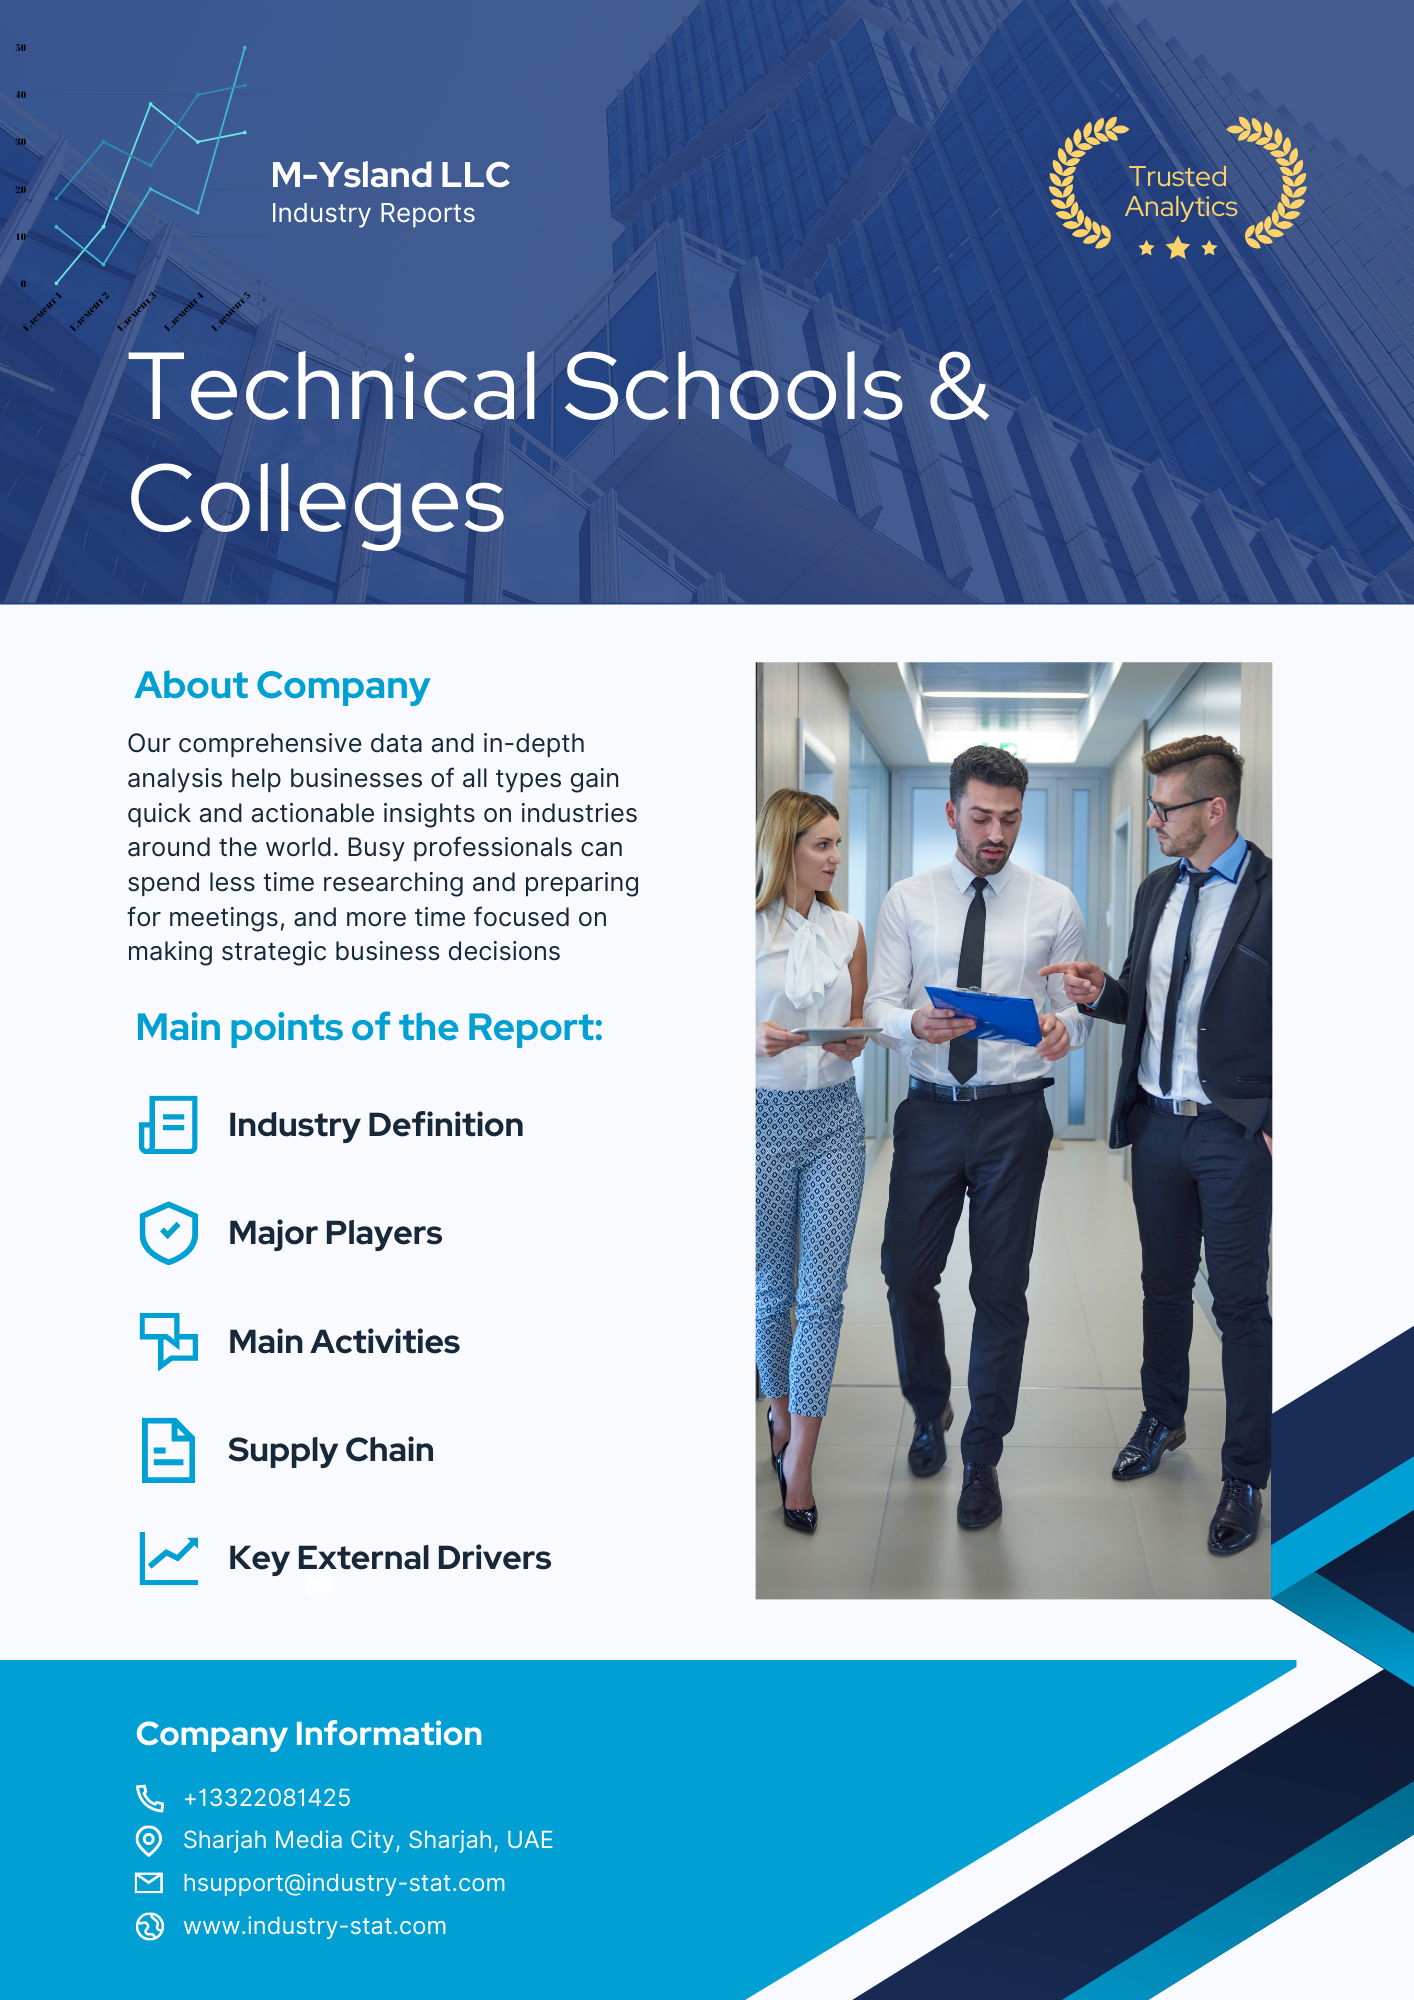 Technical Schools & Colleges